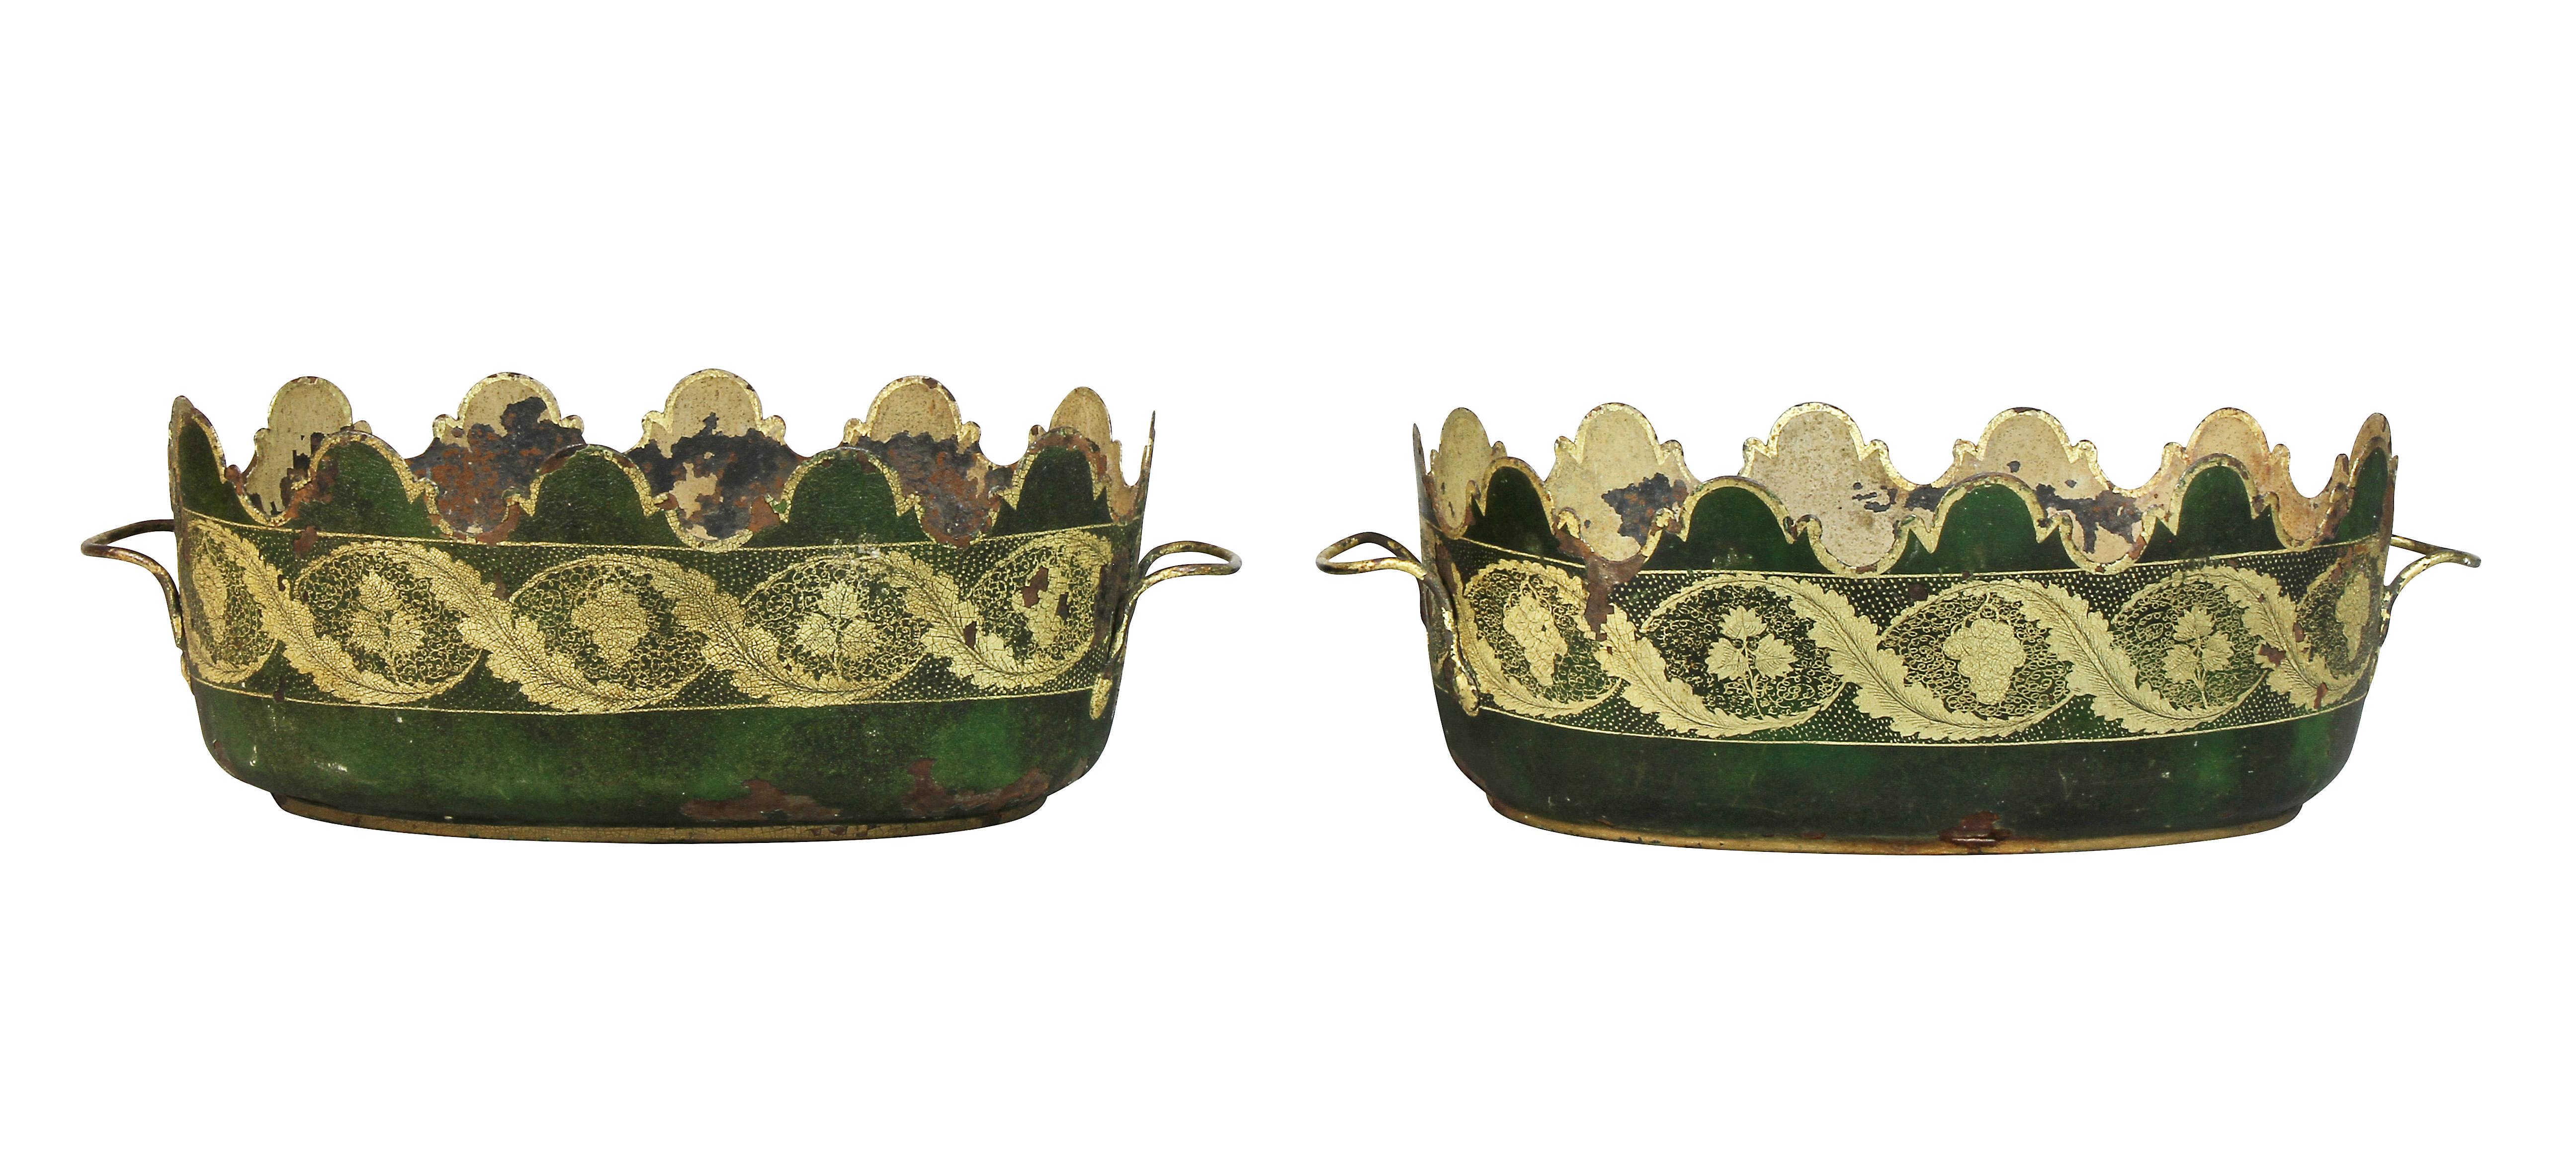 Each painted green with gilt rinceaux decoration. Oval form with loop handles.